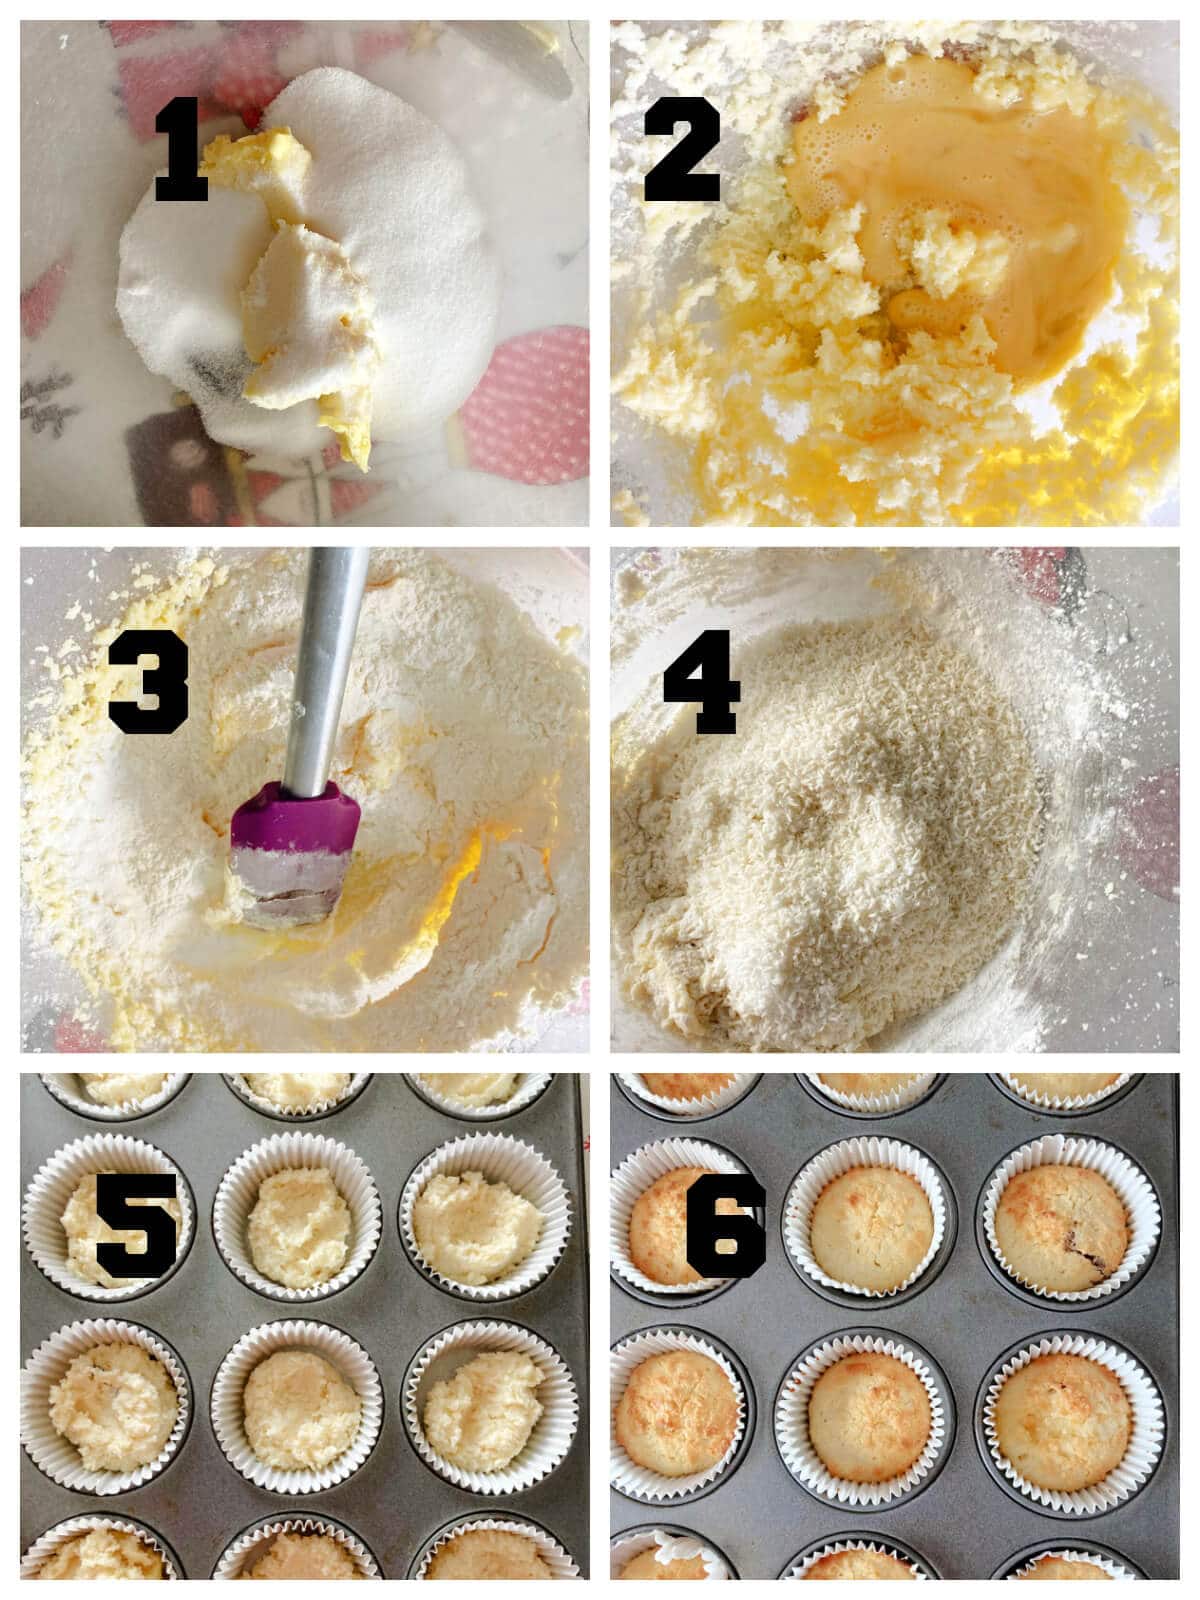 Collage of 5 photos to show how to make coconut cupcakes.